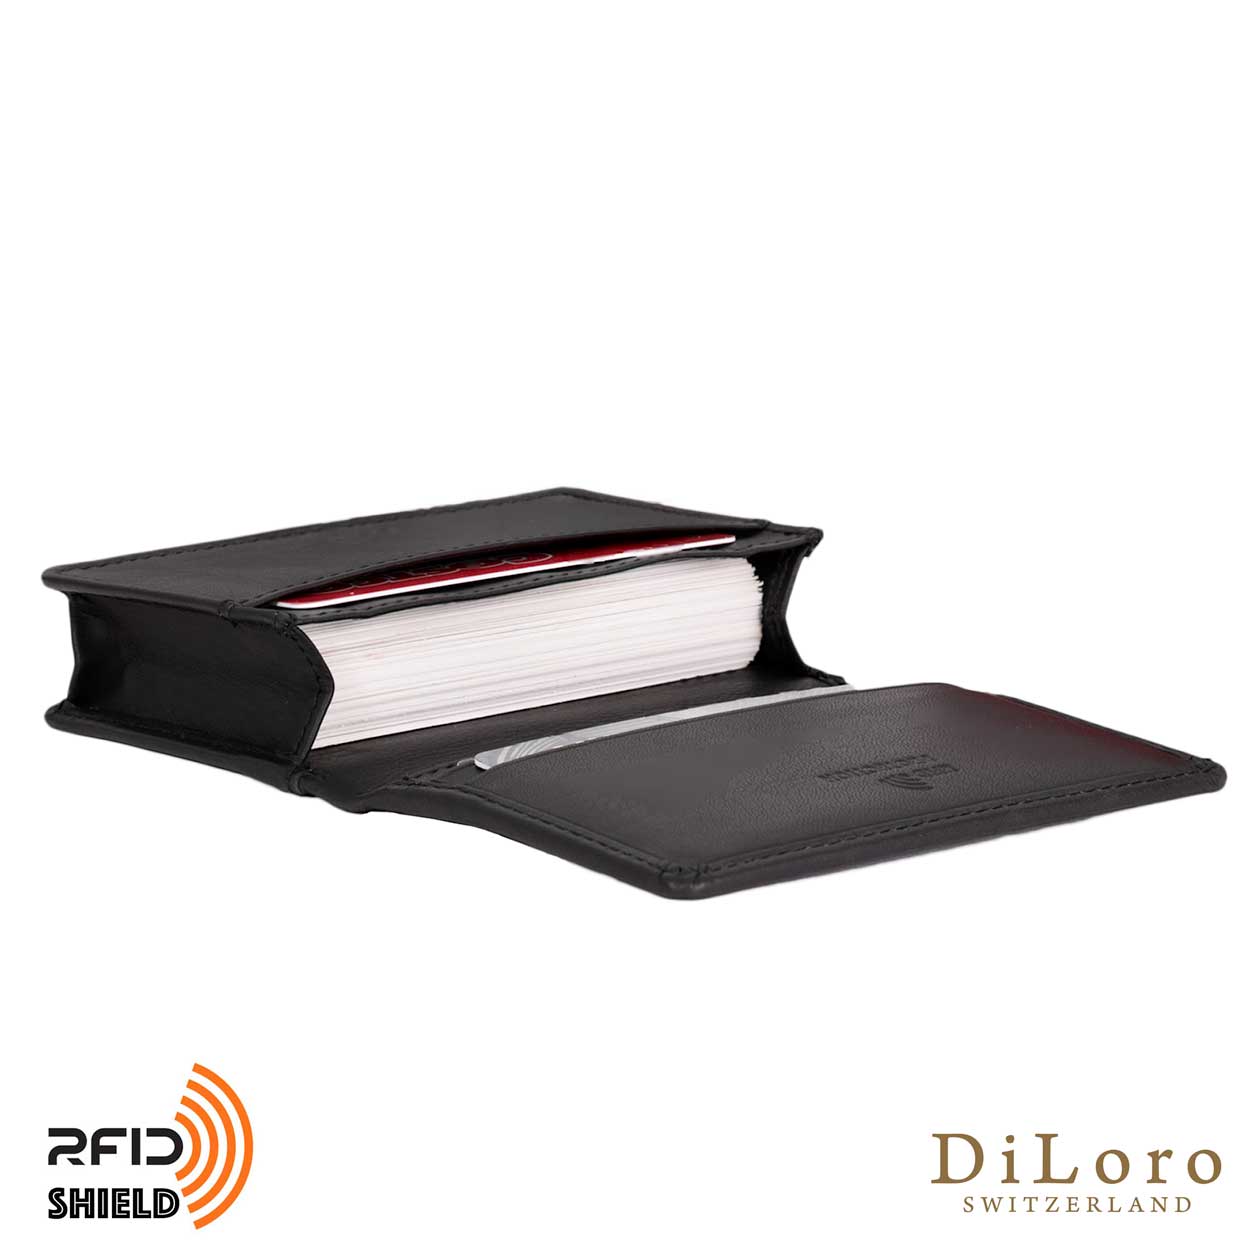 DiLoro Travel Leather Business Card Wallet Black - Open, Inside View